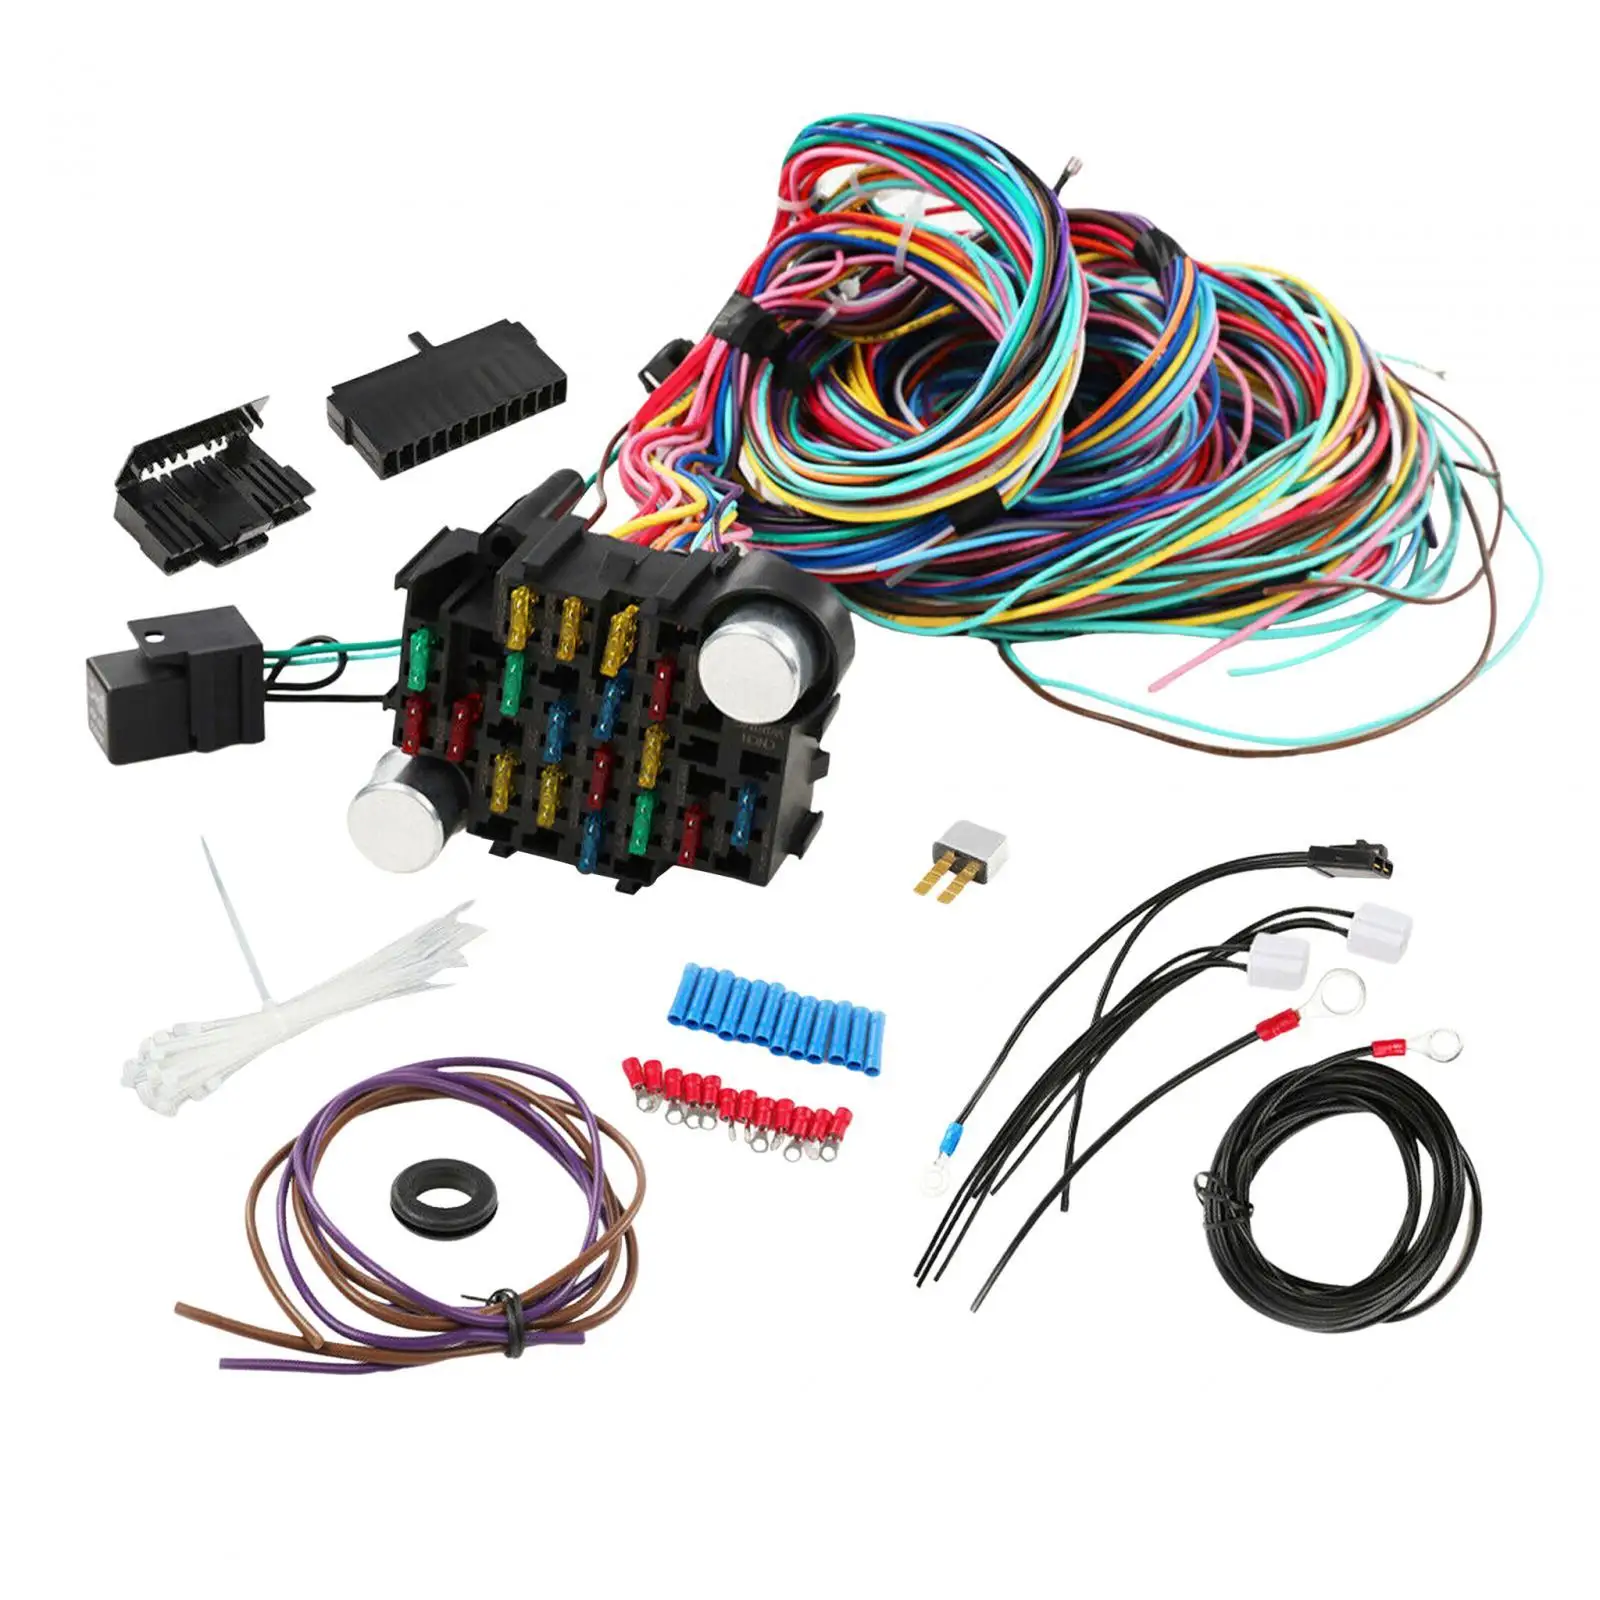 Universal Wiring Harness Kit Extra Long Wires Heavy Duty Replacement Spare Parts 21 Circuit Wiring Harness for Automotive